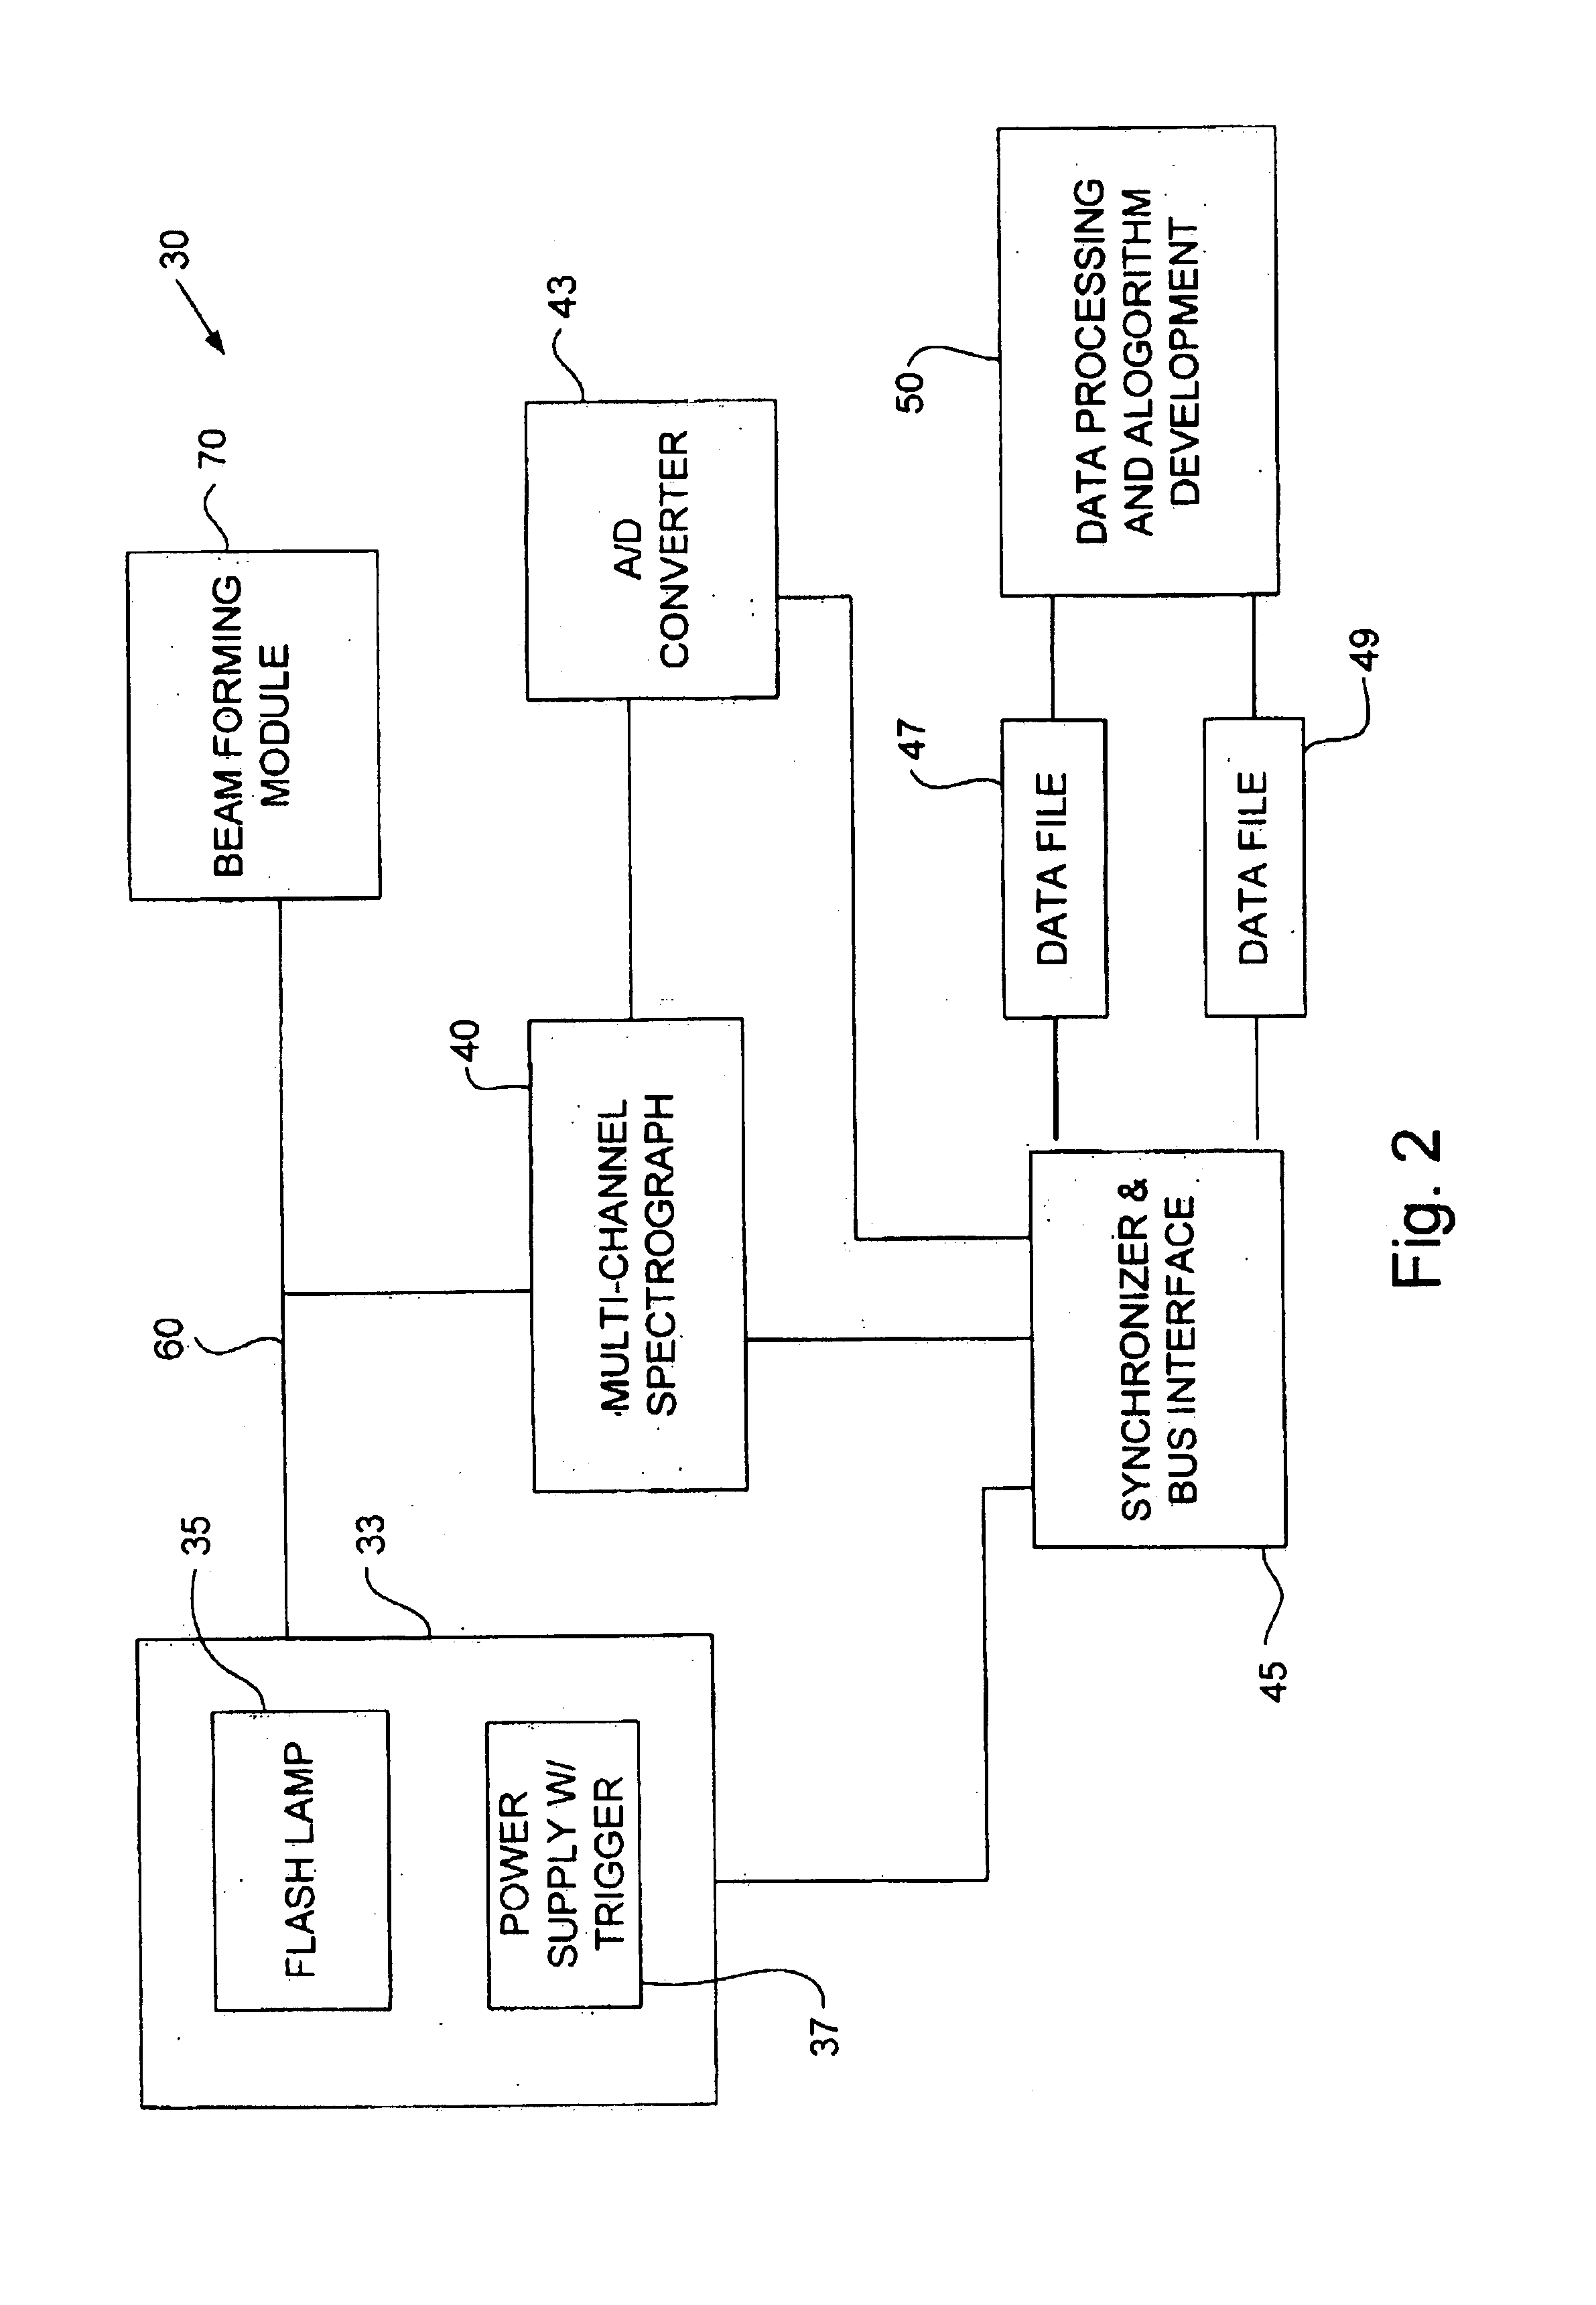 Method and apparatus for in-situ monitoring of plasma etch and deposition processes using a pulsed broadband light source